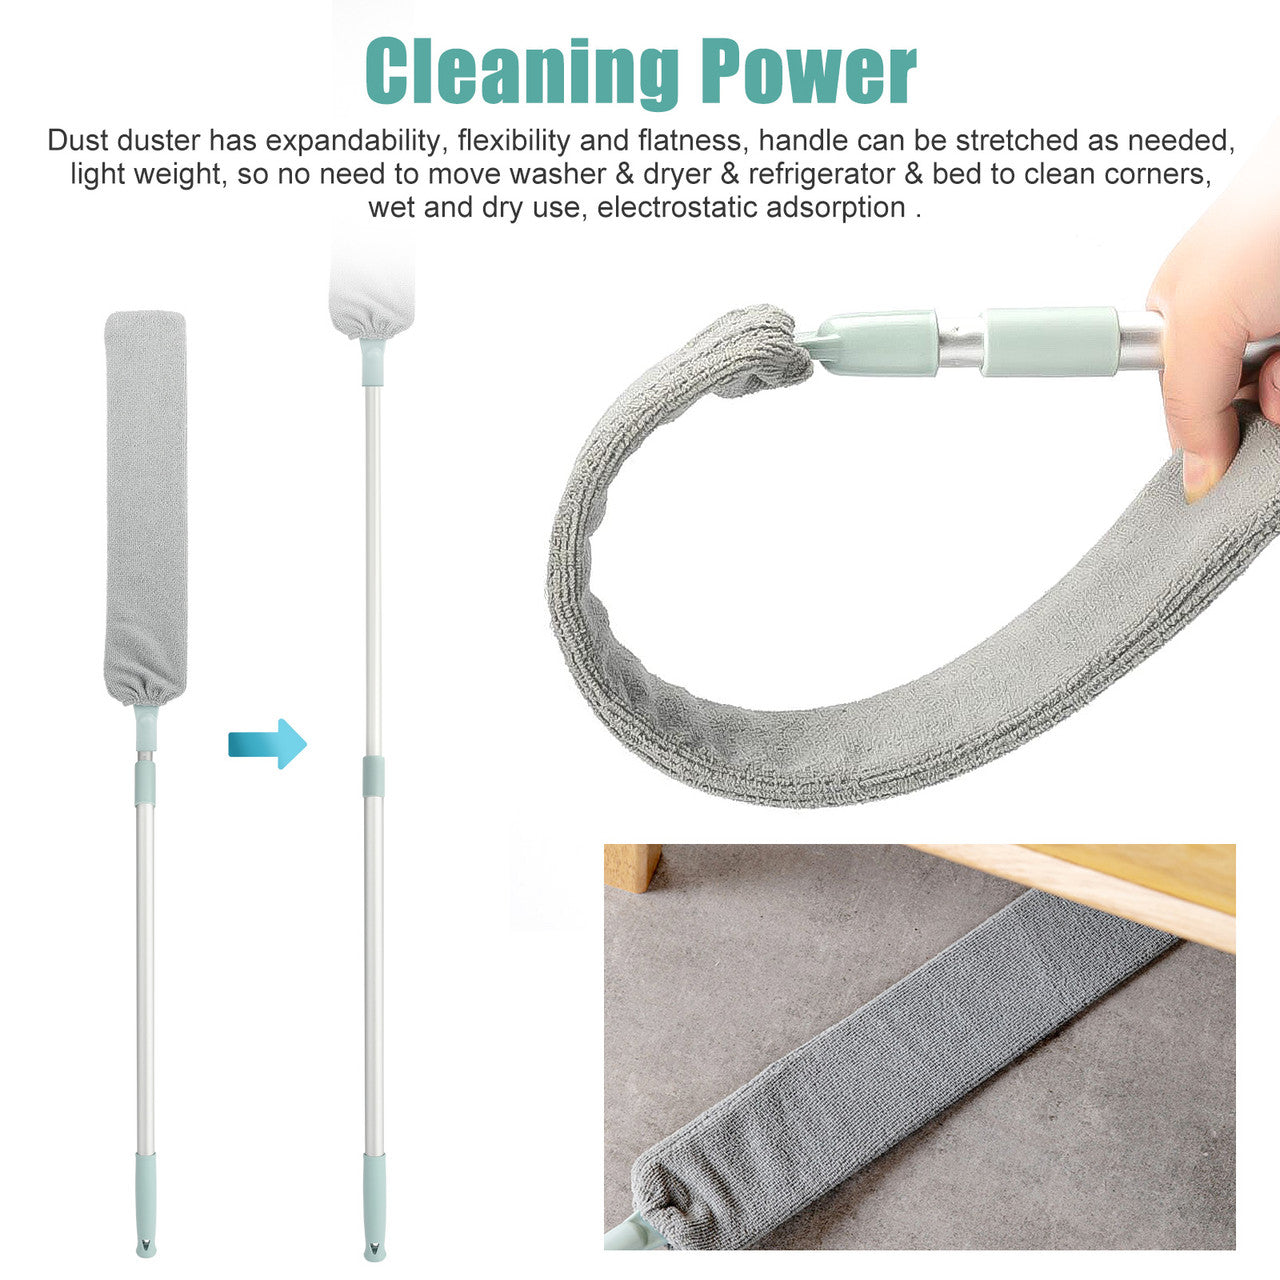 Retractable Flat Crevice Duster - Retractable Gap Dust Cleaner, the Rod Length Is Adjustable